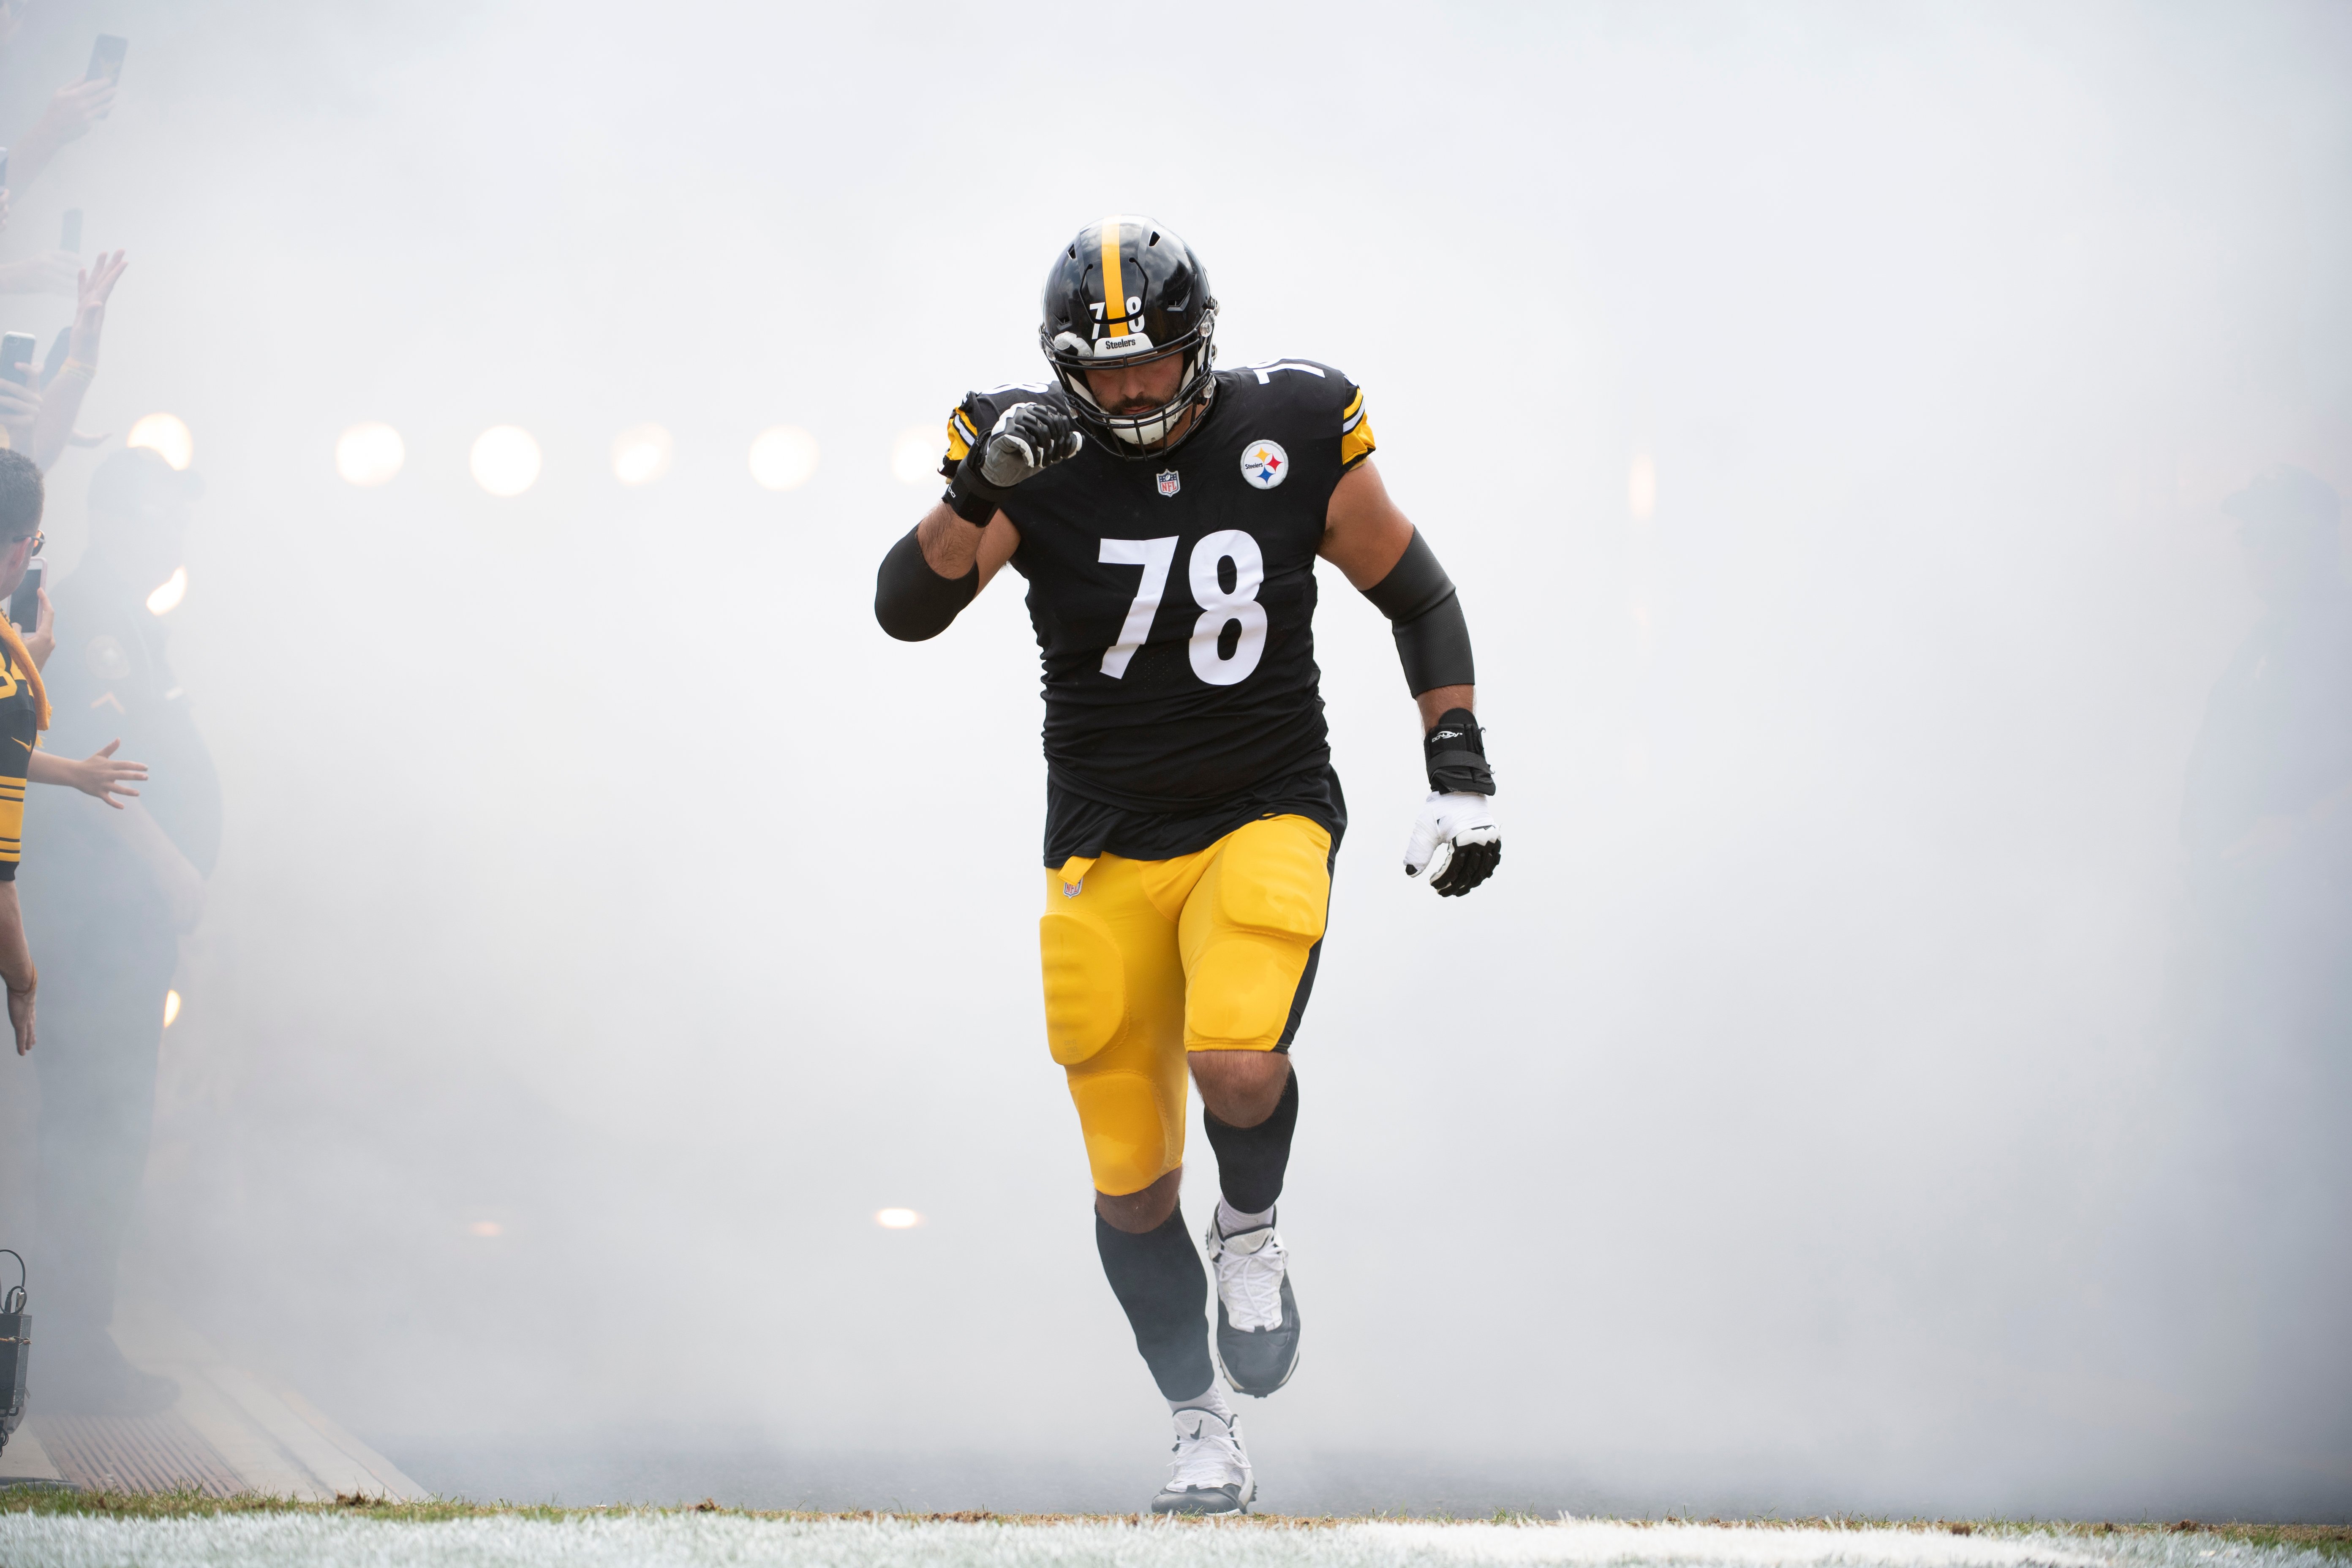 Soldier to Steeler: NFL Star Shares Insight to Military Service